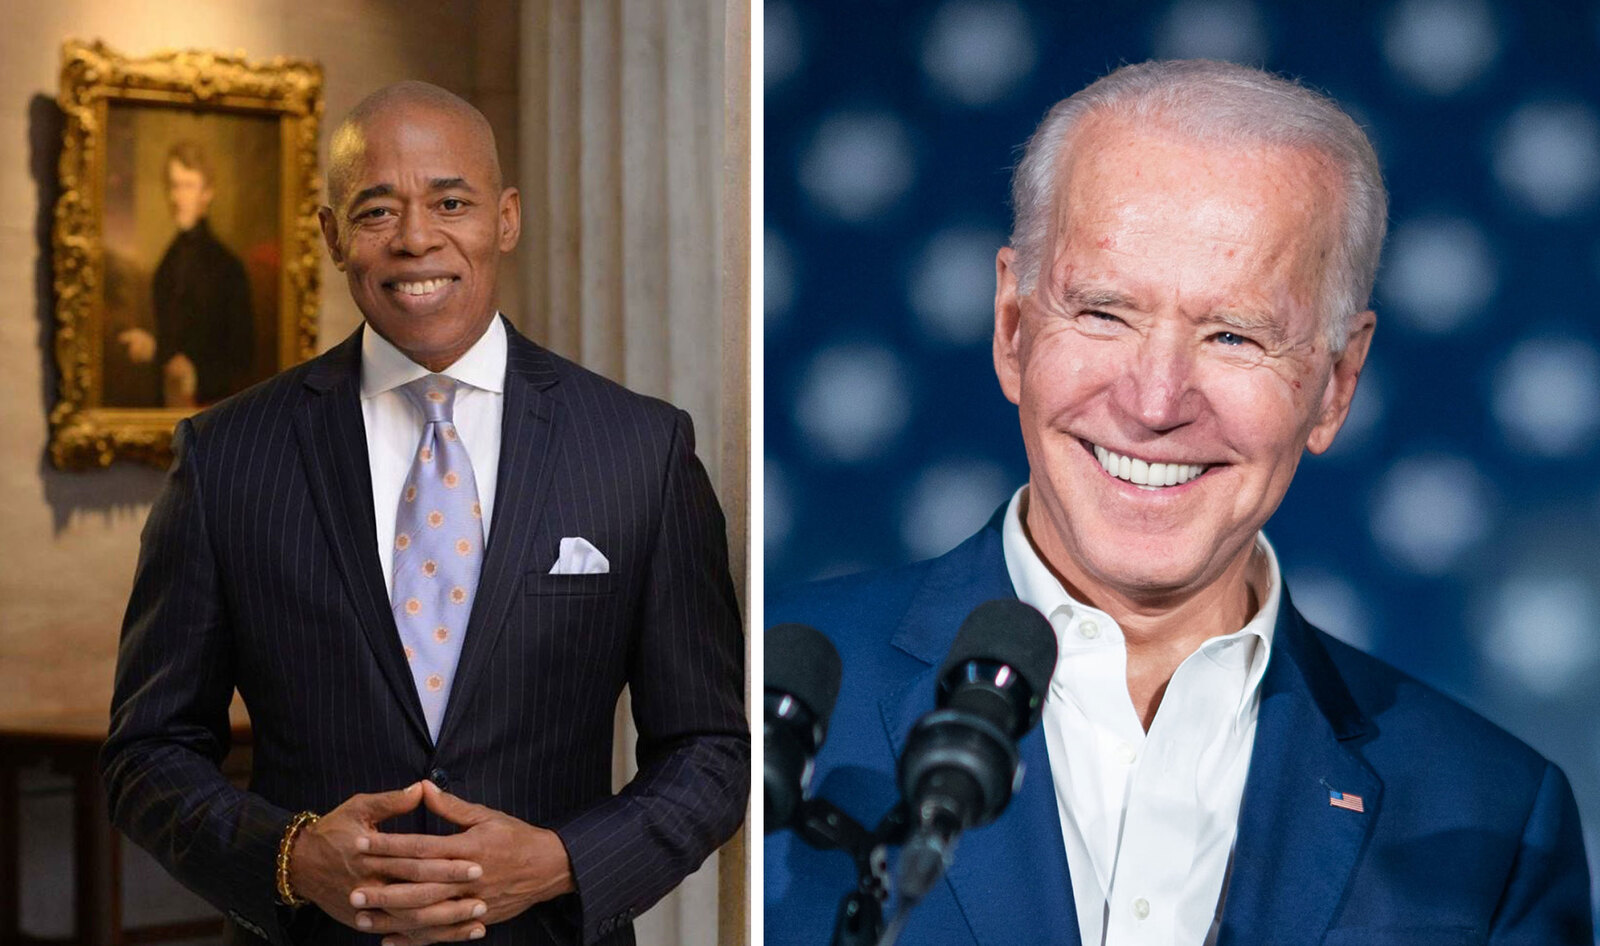 Brooklyn President to Biden: We Need a Dialogue on Plant-Based Nutrition